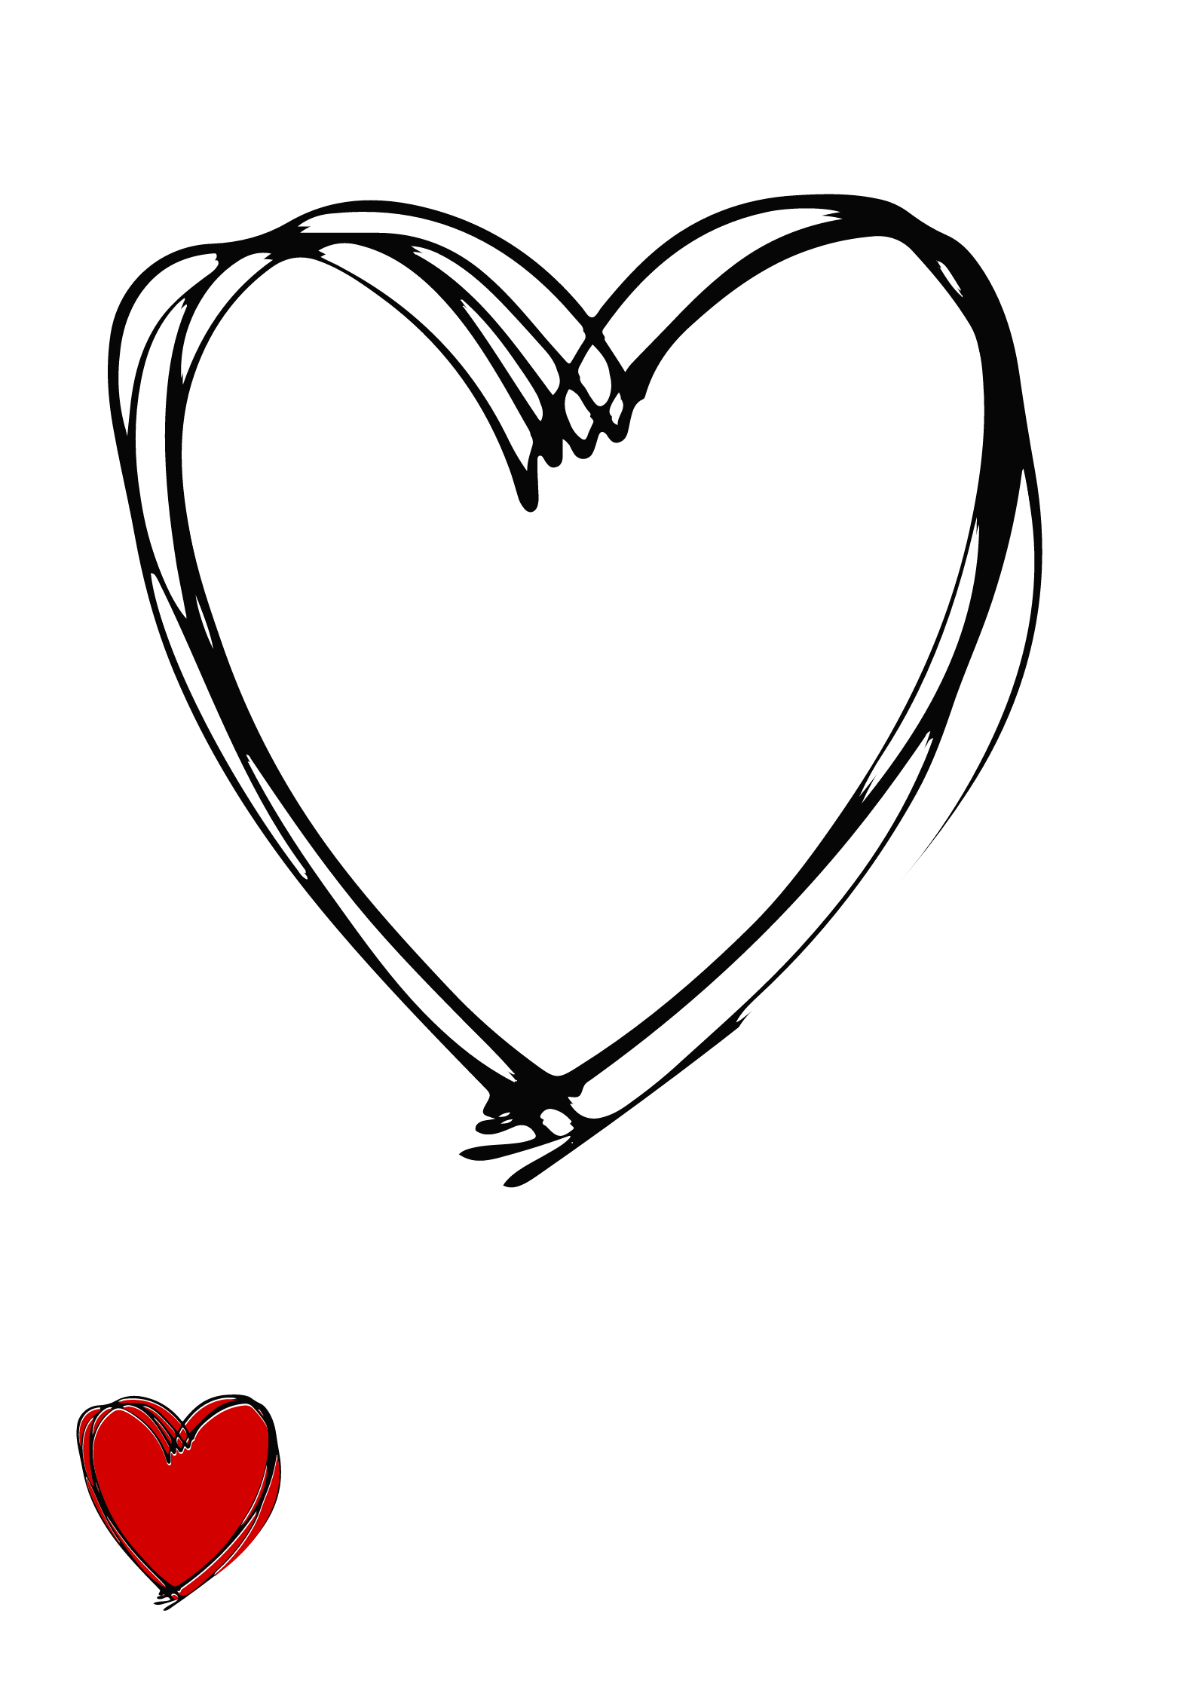 Heart Outline Sketch Coloring Page Template